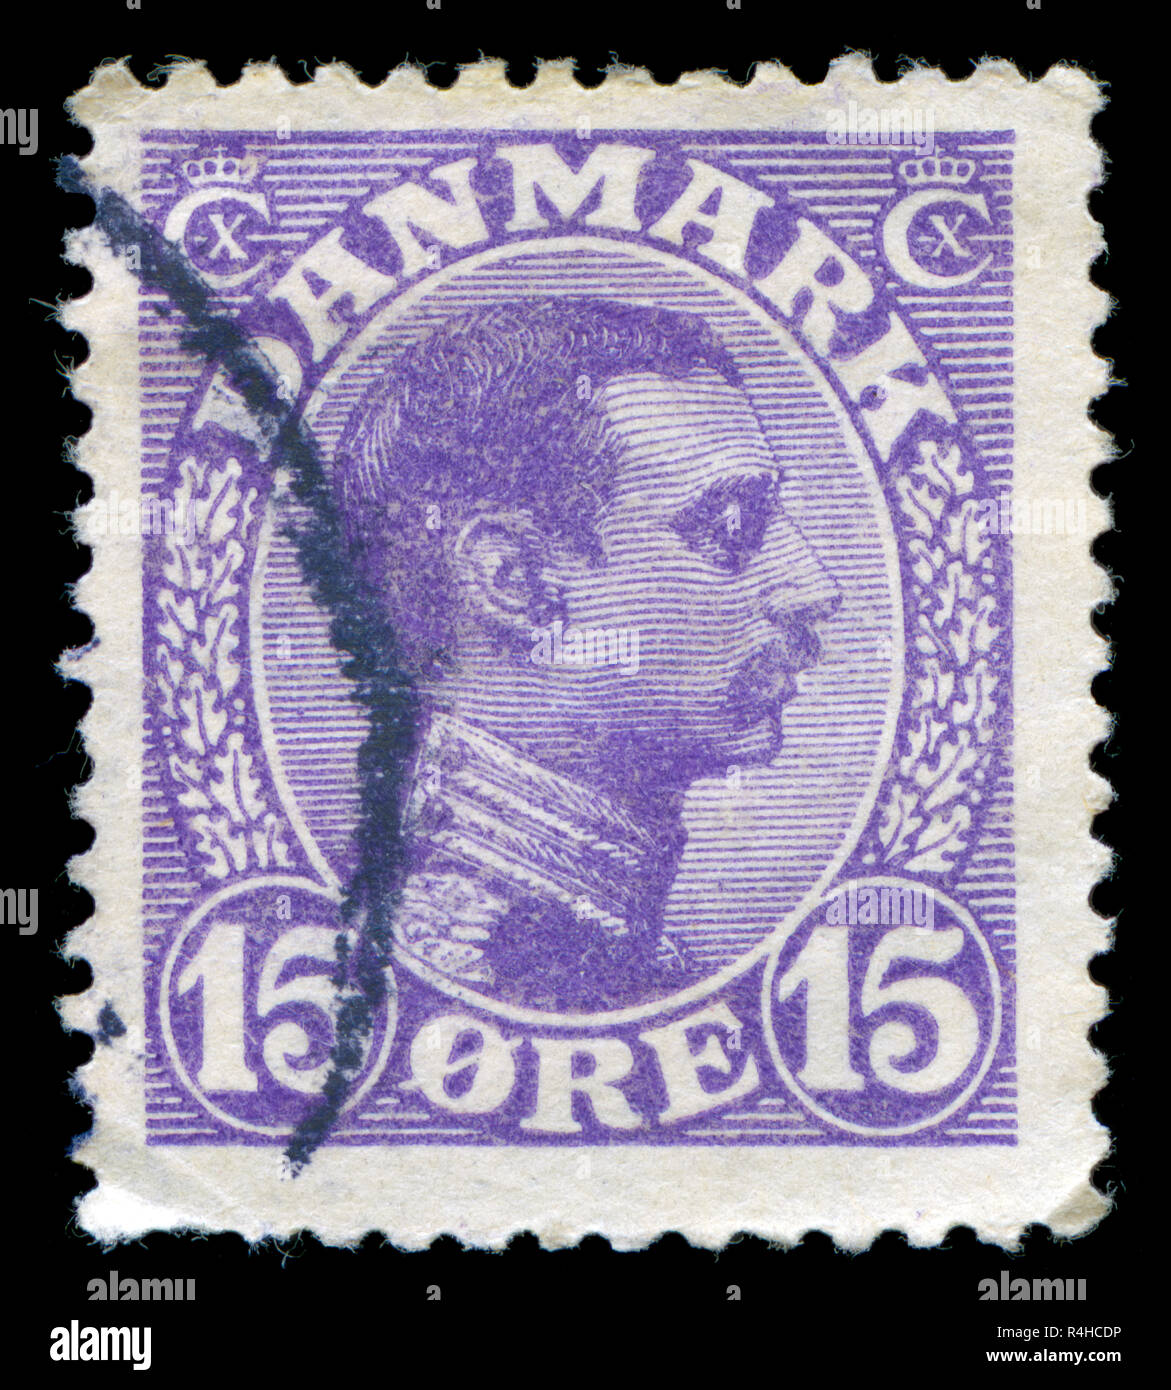 Postmarked stamp from Denmark in the King Christian X series issued in 1913 Stock Photo